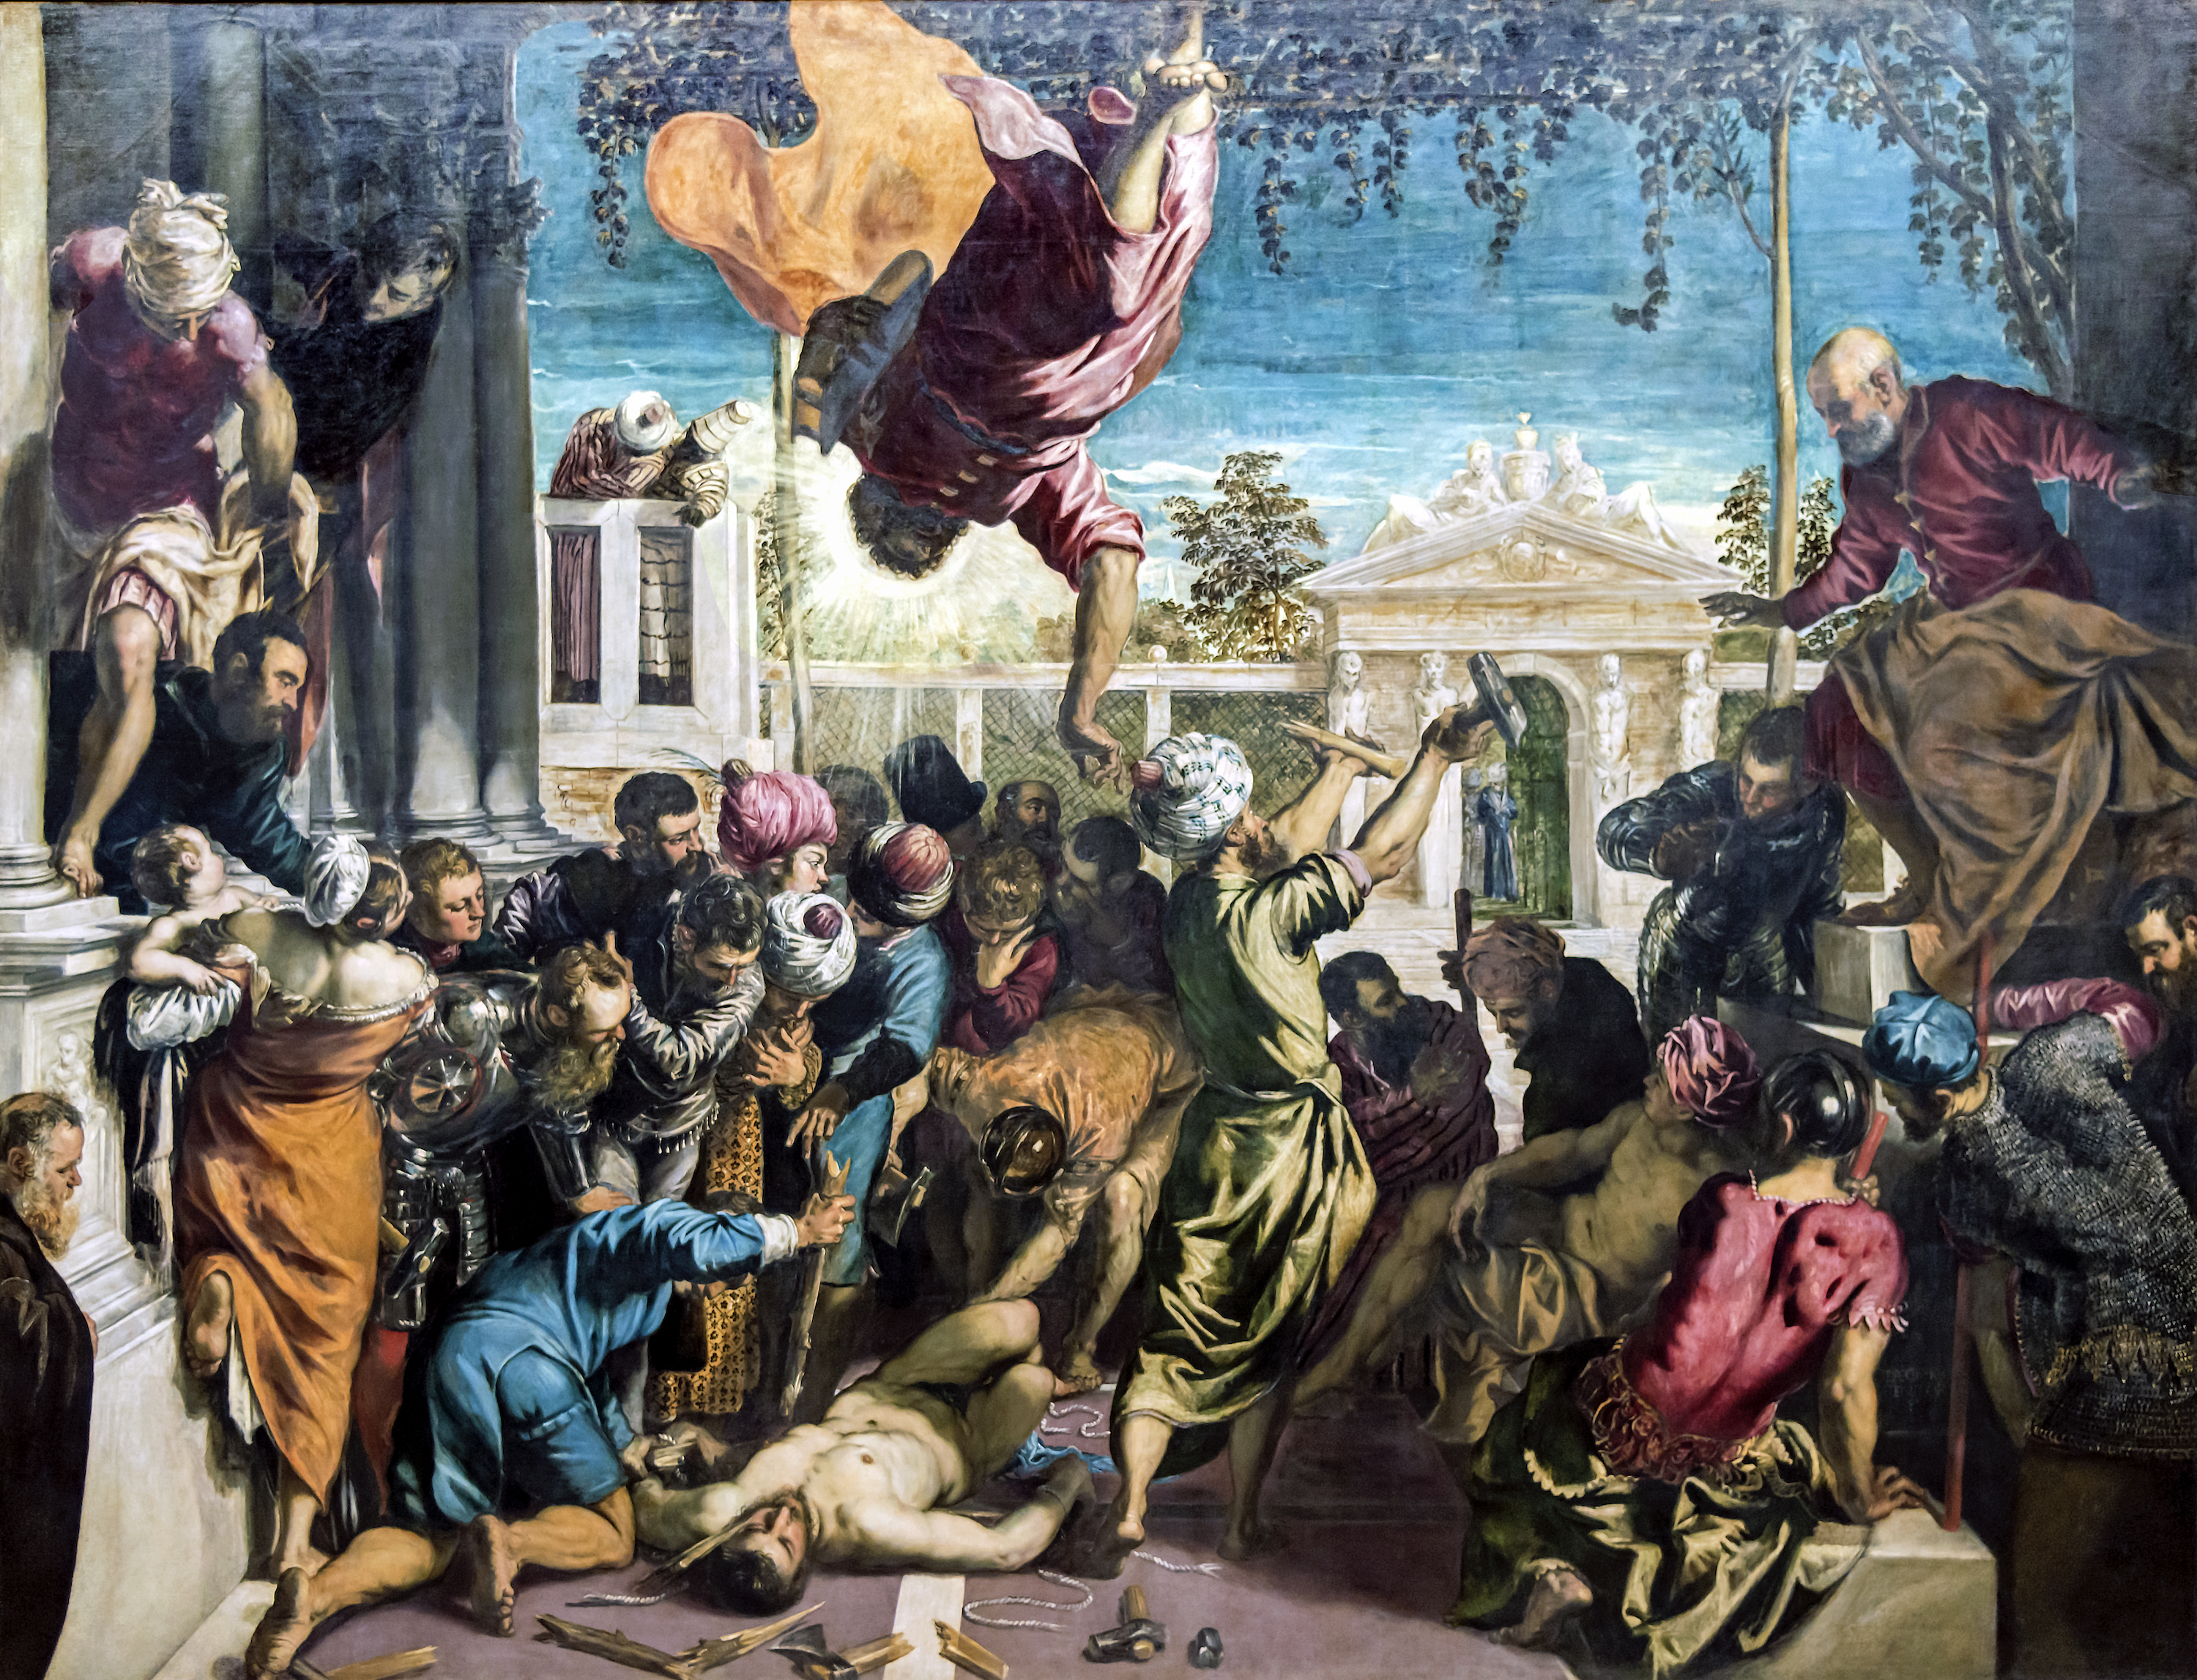 tintoretto drawings